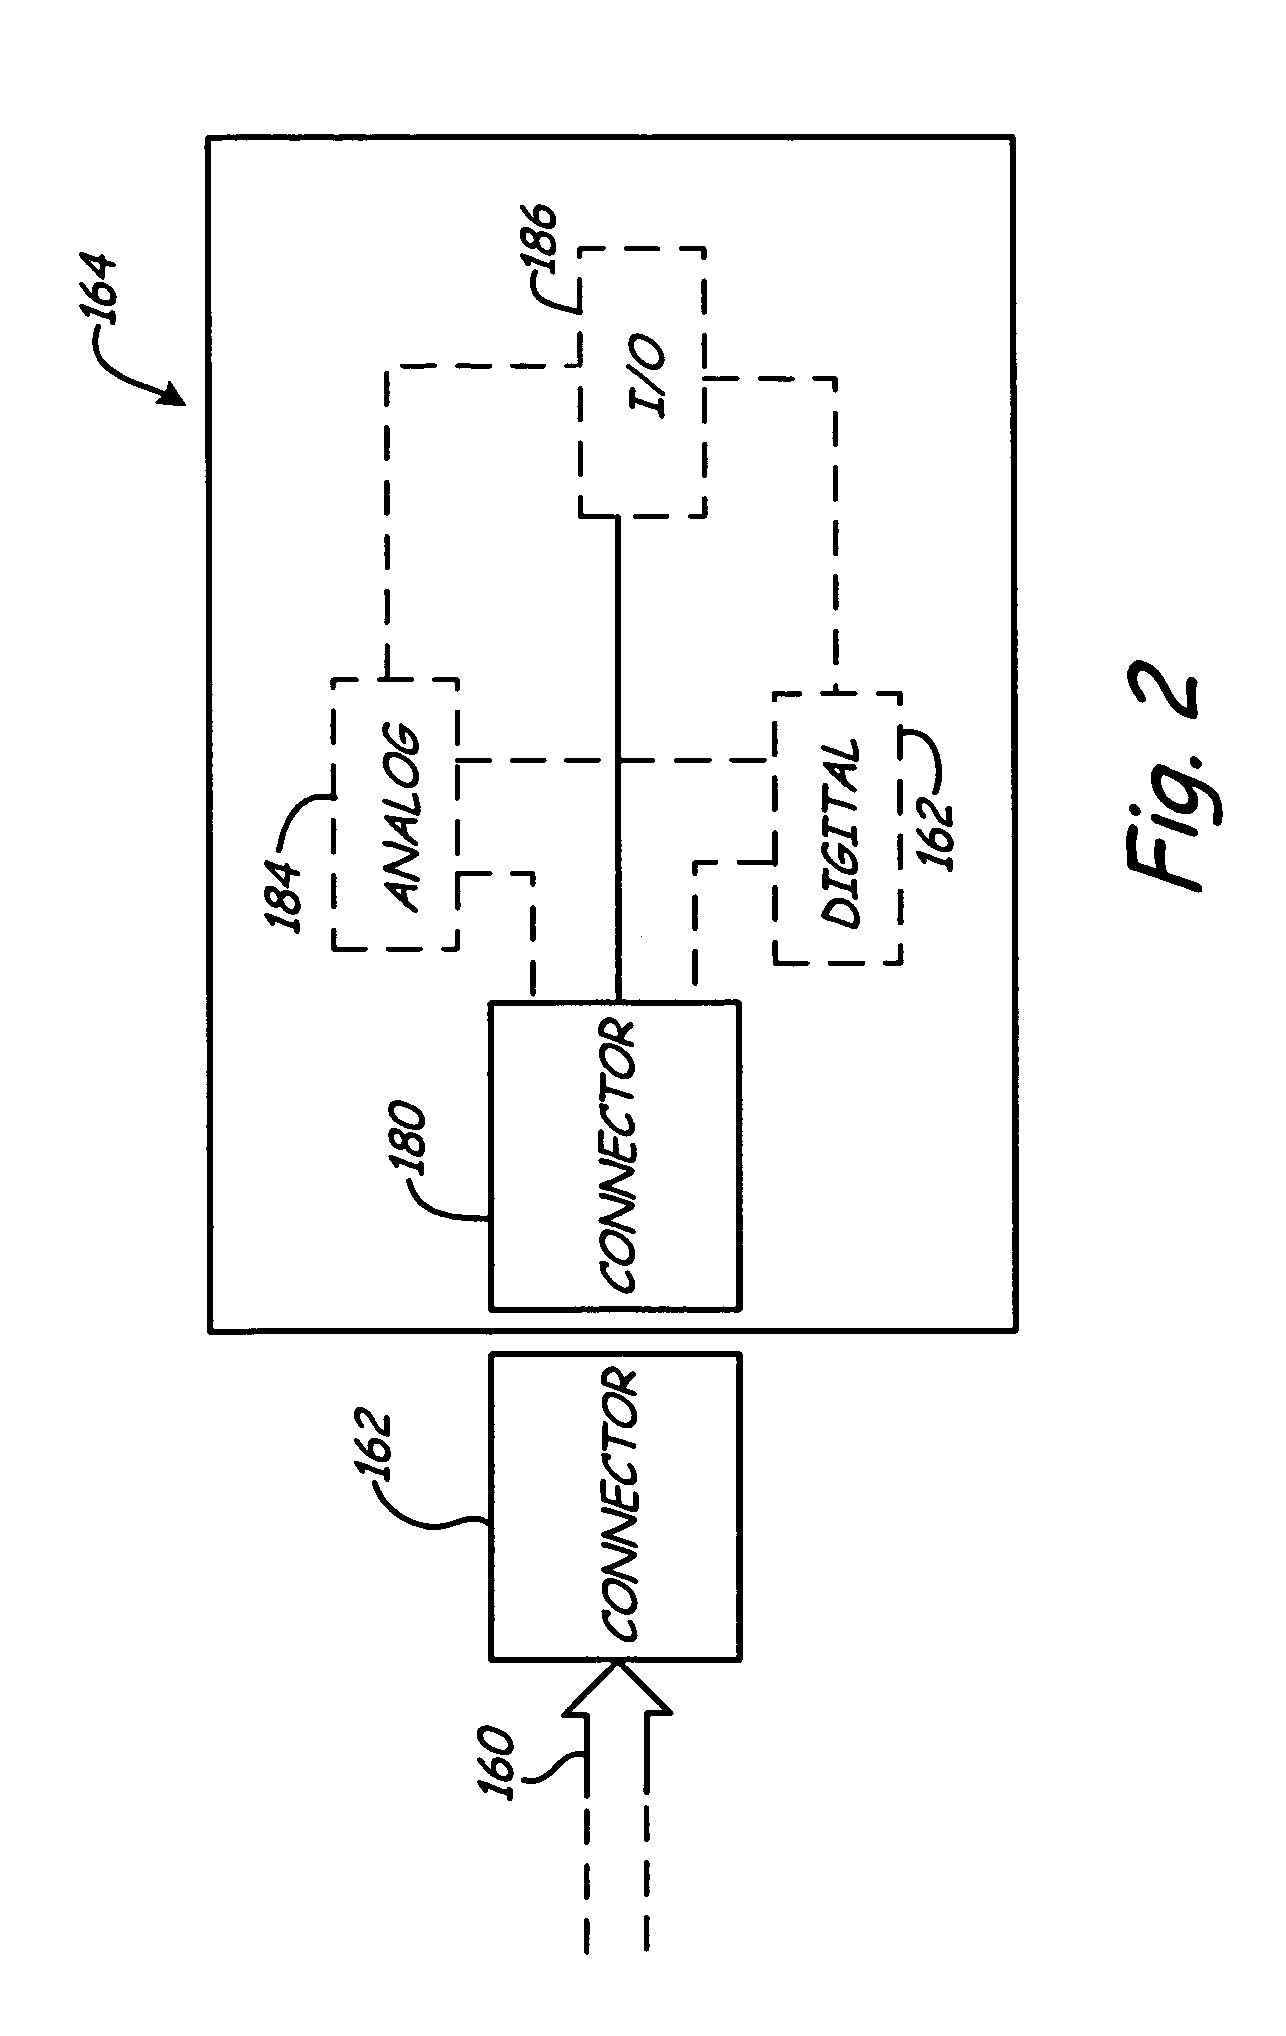 Battery testers with secondary functionality